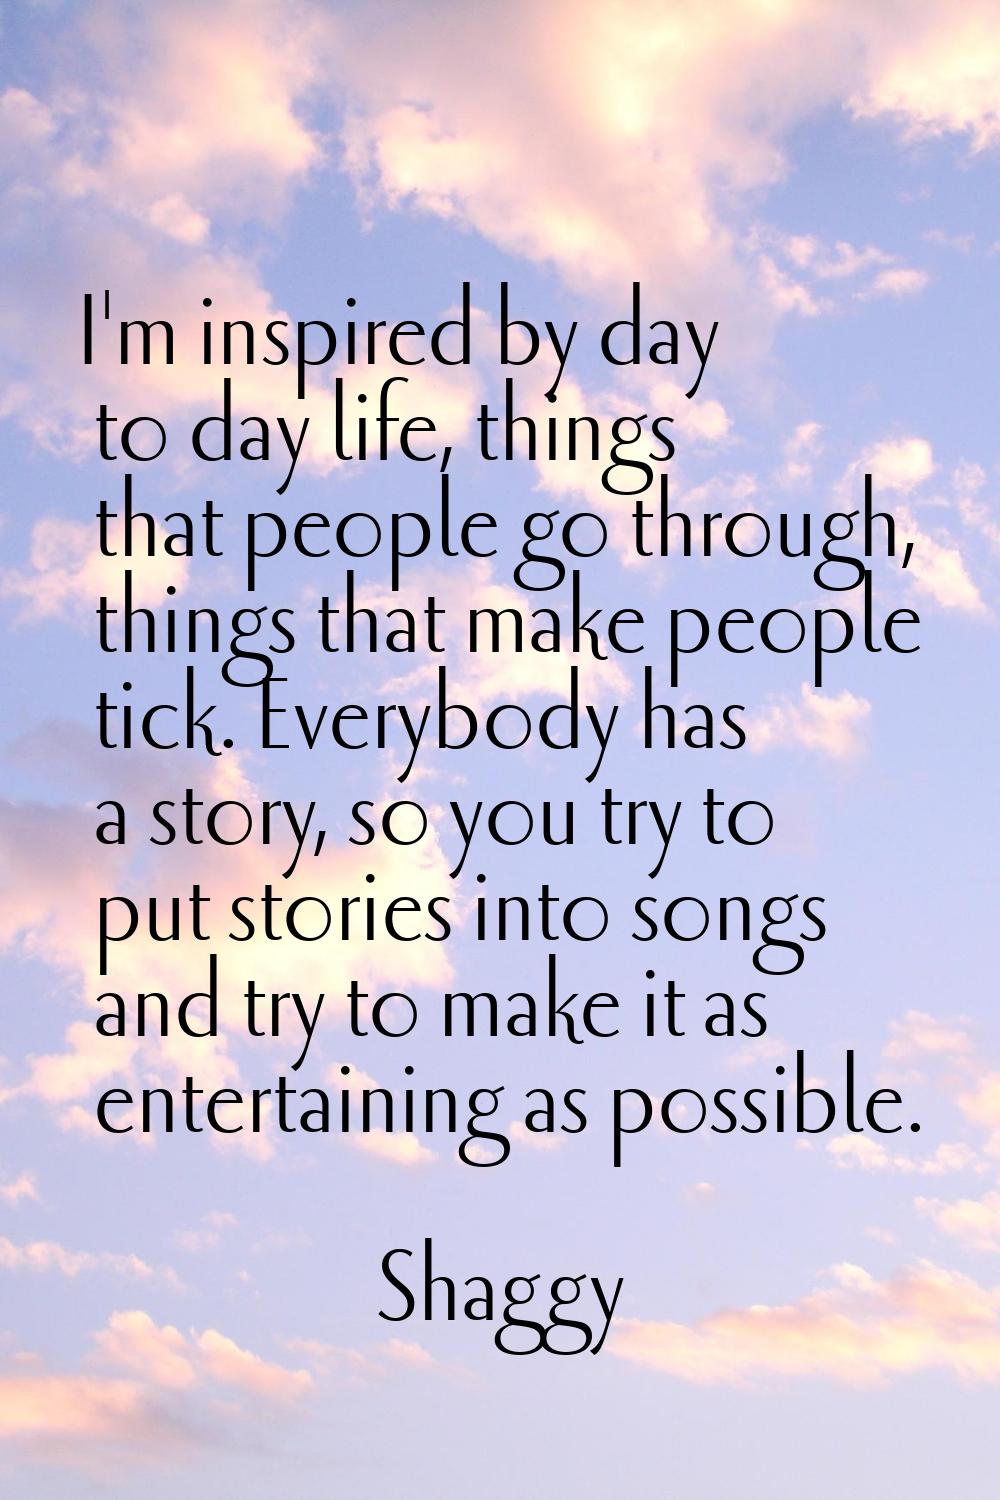 I'm inspired by day to day life, things that people go through, things that make people tick. Every